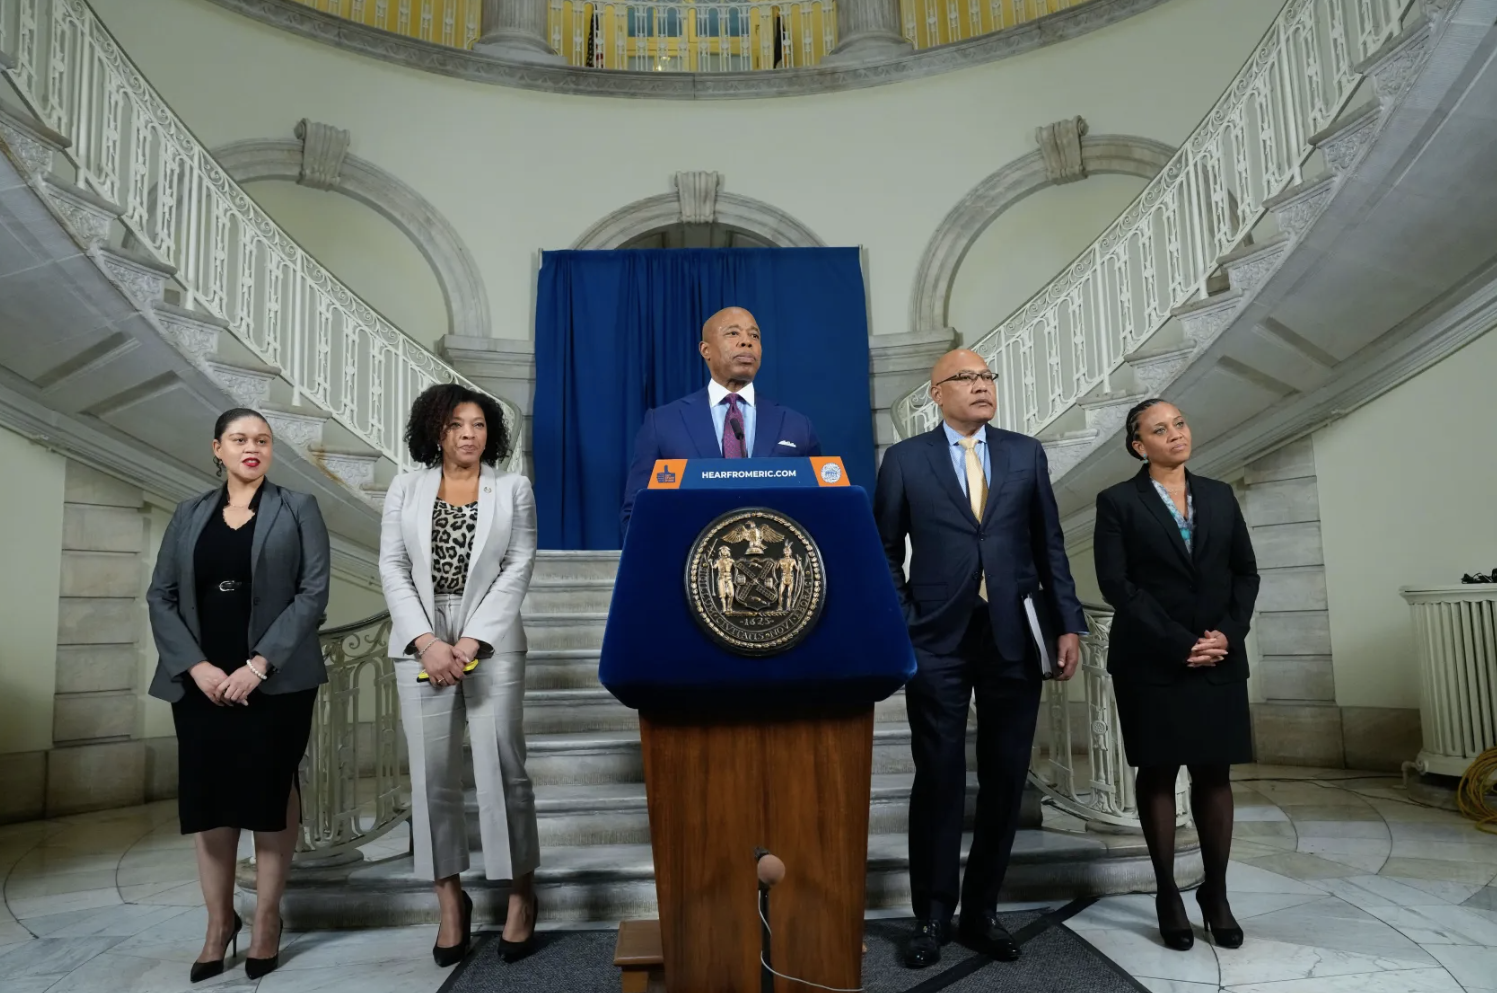 NYC’s education budget could drop by $960M next year under mayor’s proposal